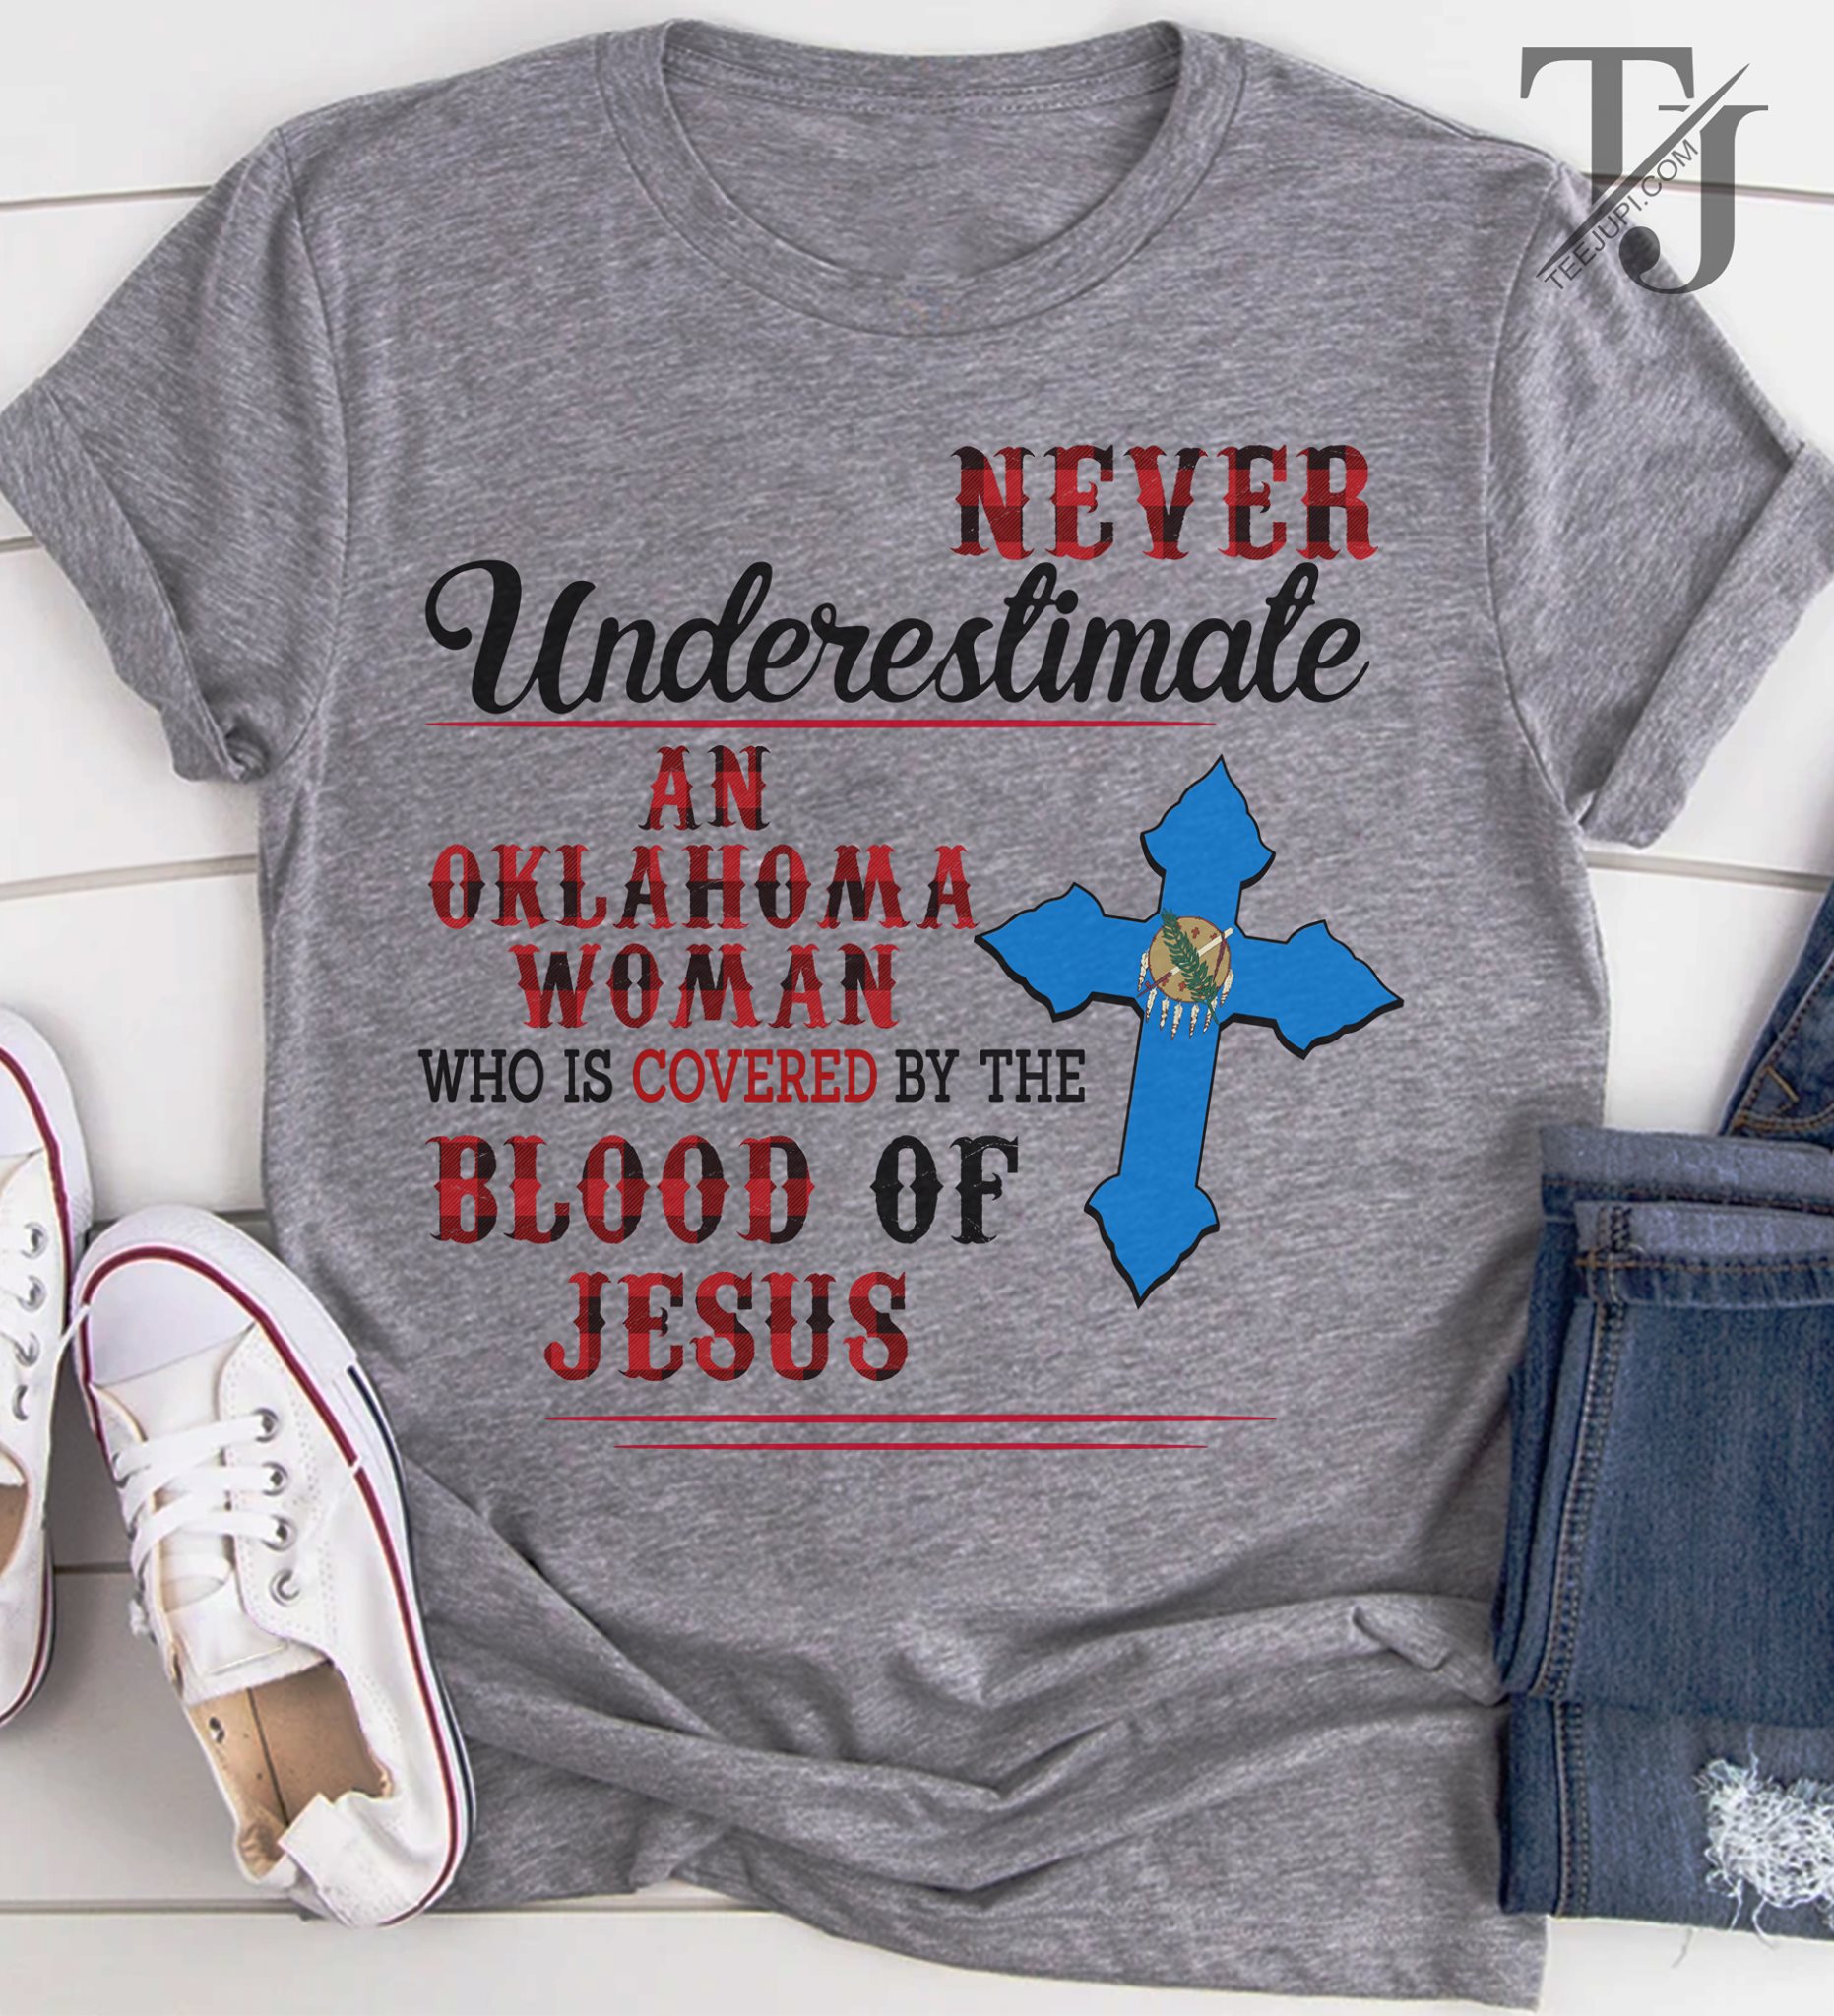 Never underestimate an Oklahoma woman who is covered by the blood of Jesus